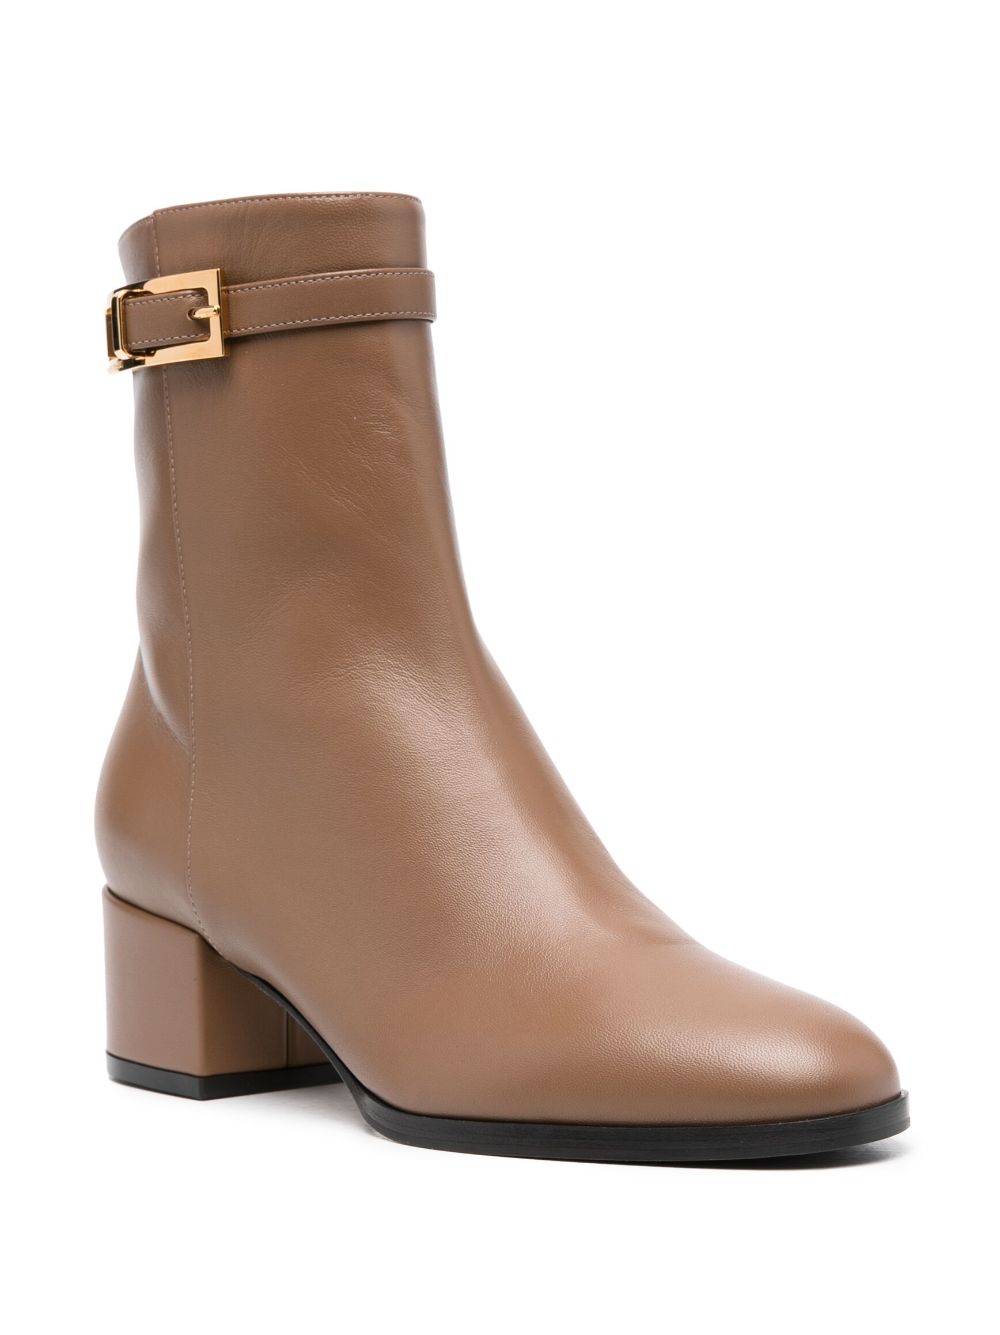 Sergio Rossi 50mm leather ankle boots - Bruin